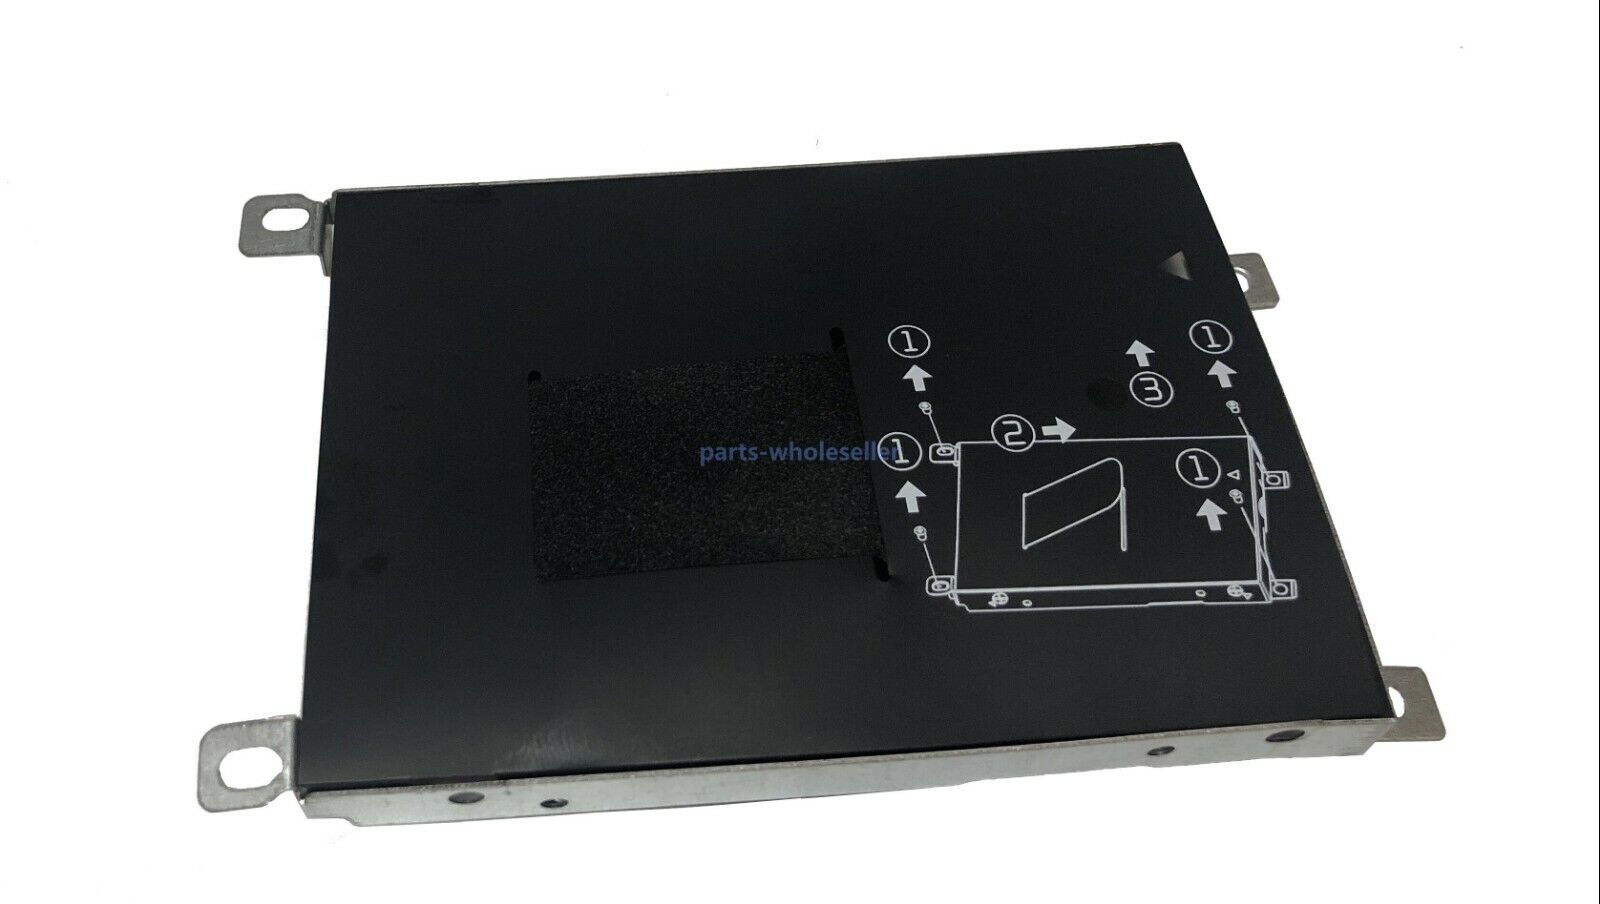 New SSD HDD Hard Drive Caddy Frame Bracket for HP ProBook 450 455 470 475 G3